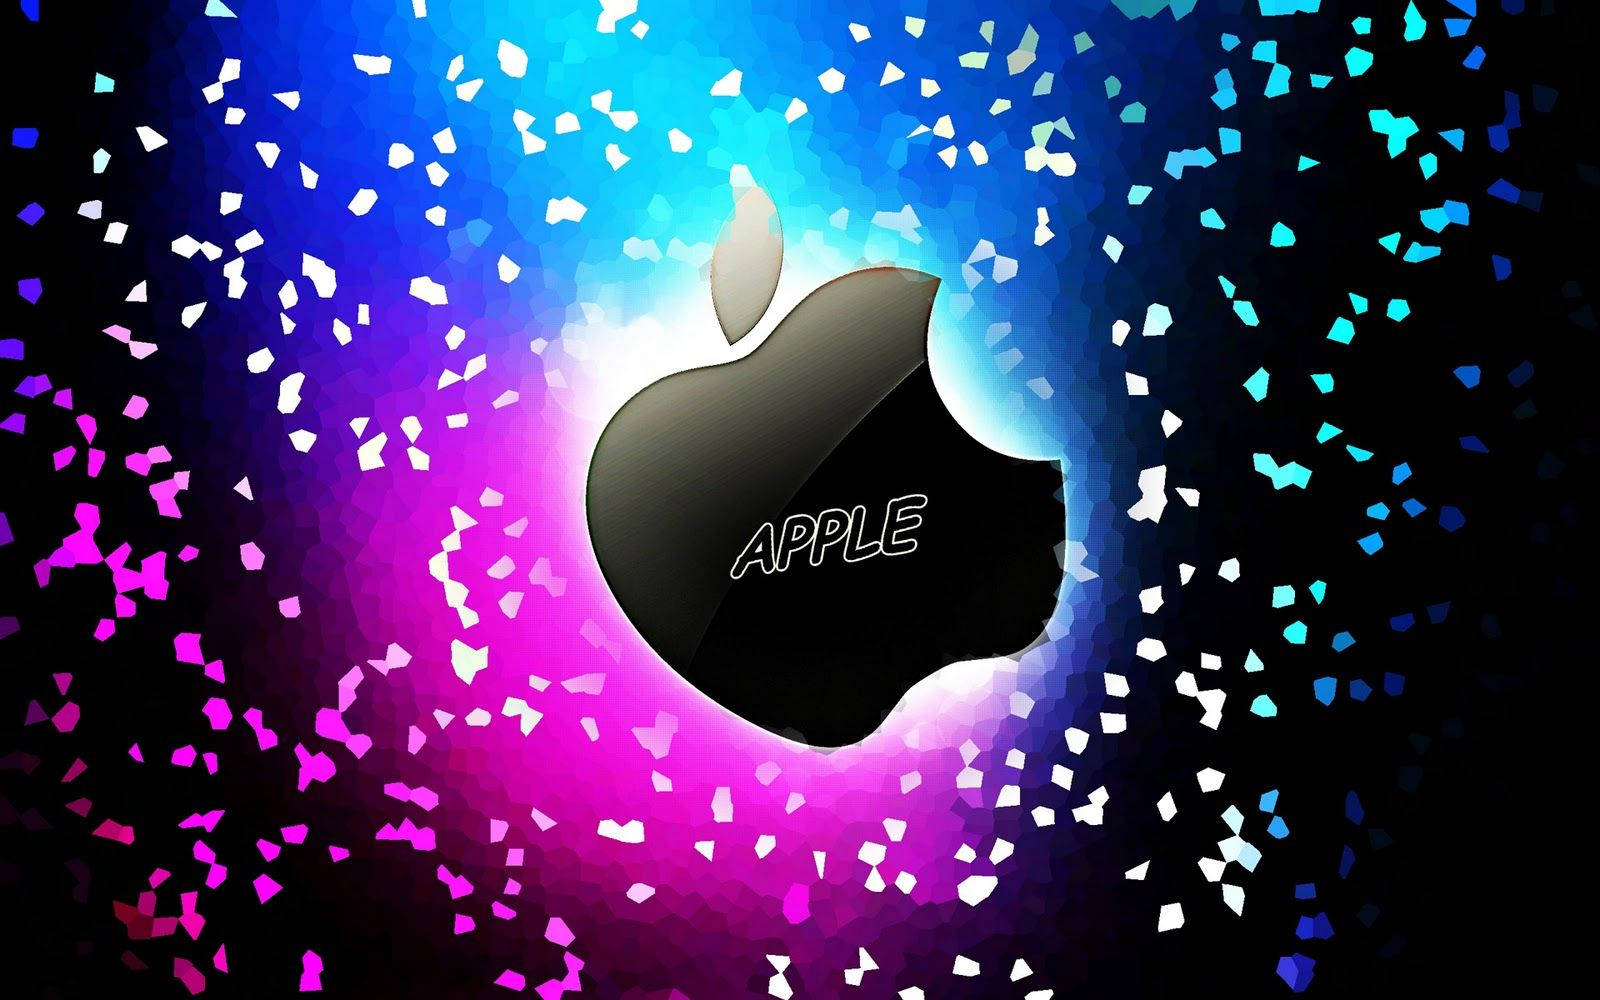 Apple Logo Abstract Confetti Background